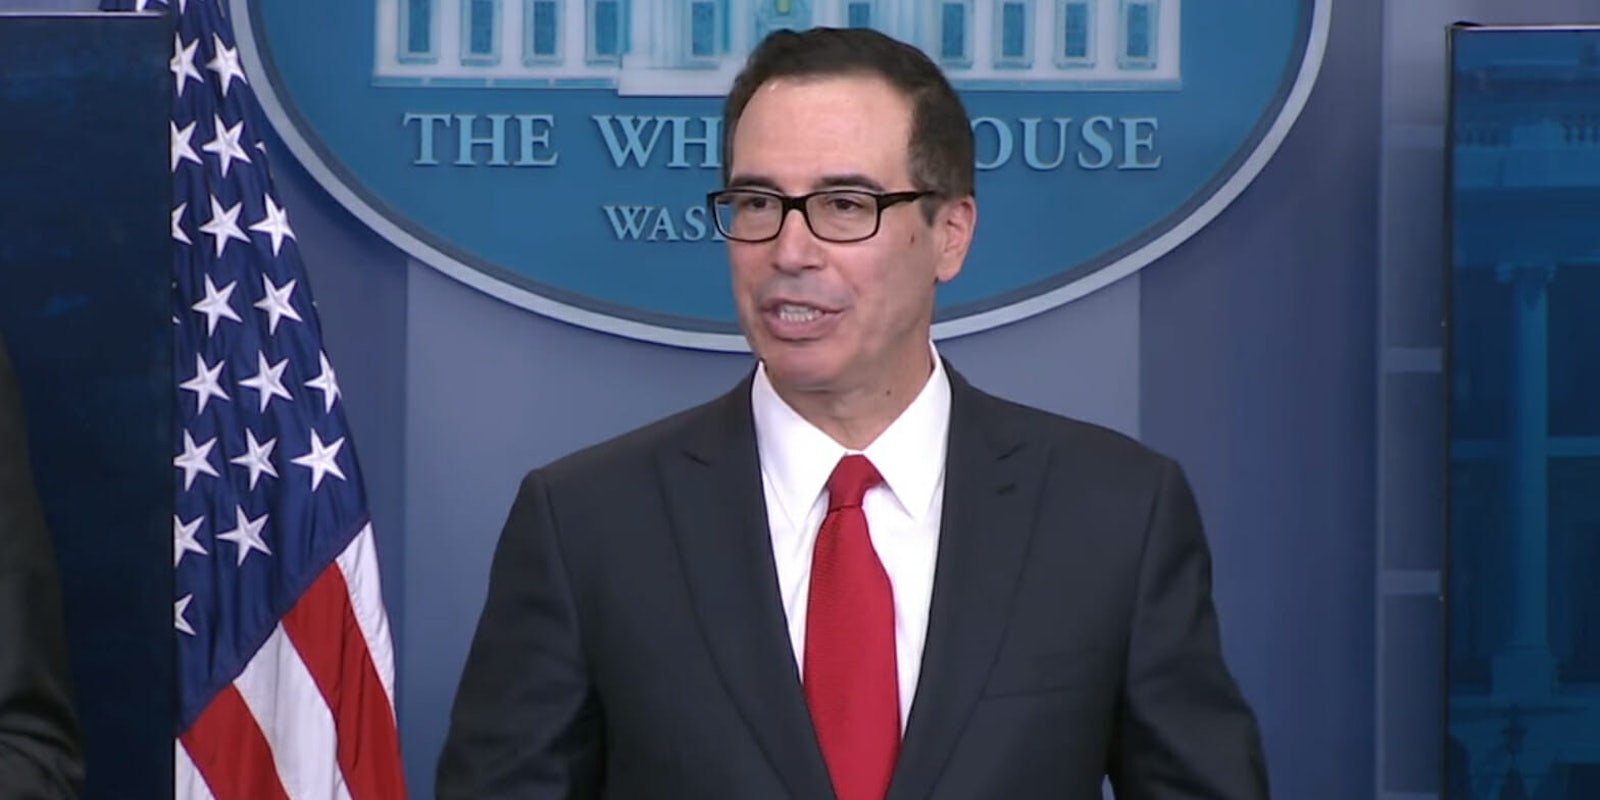 Steve Mnuchin said on Wednesday that his account was used by someone who was not authorized to do so and posted a tweet critical of General Motors.